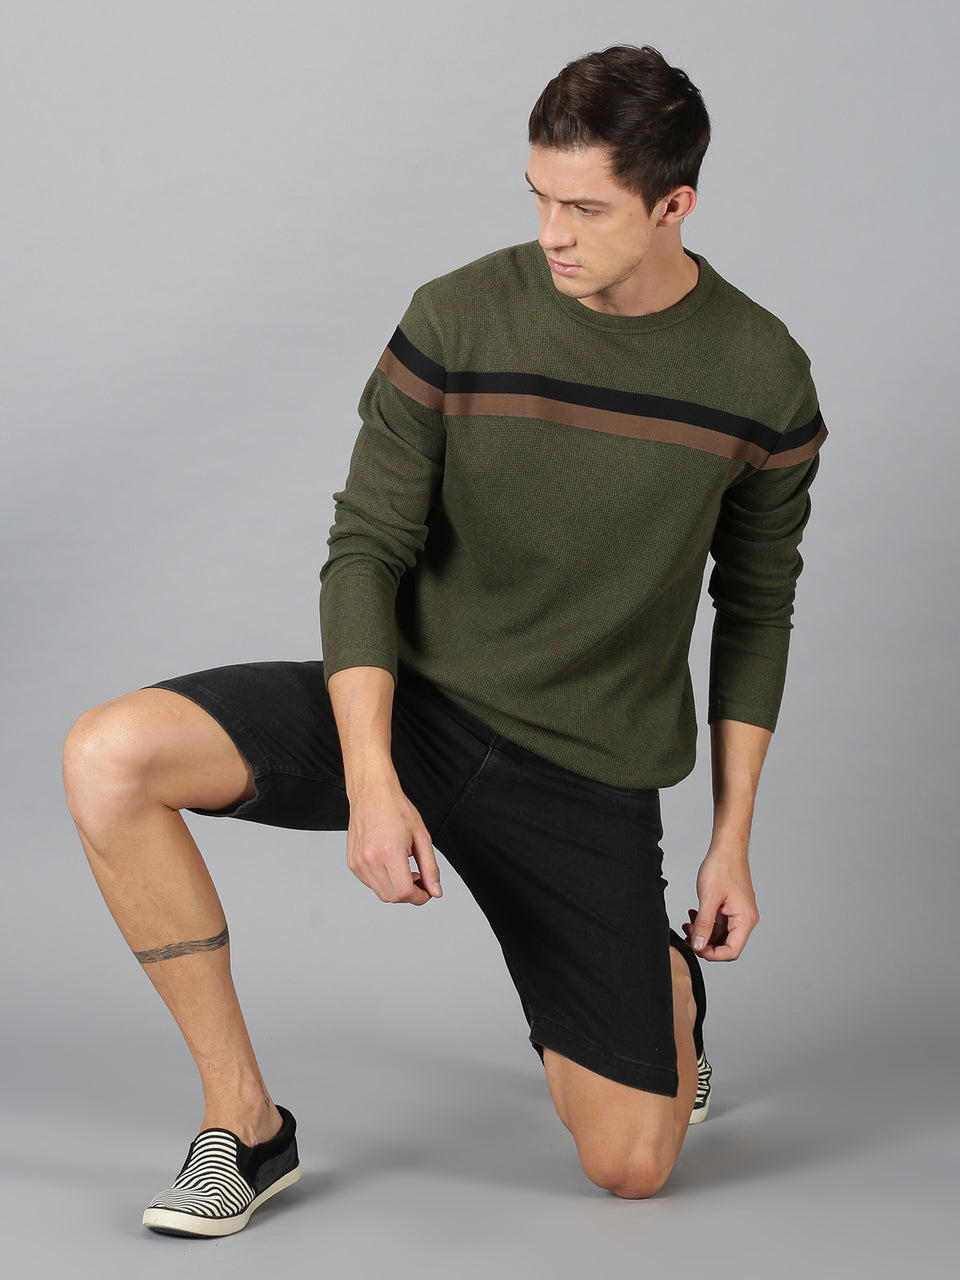 Men Olive Green Chest Tape Waffy High Neck Recycled Cotton Long Sleeve Regular Fit Casual Pullover Sweatshirt